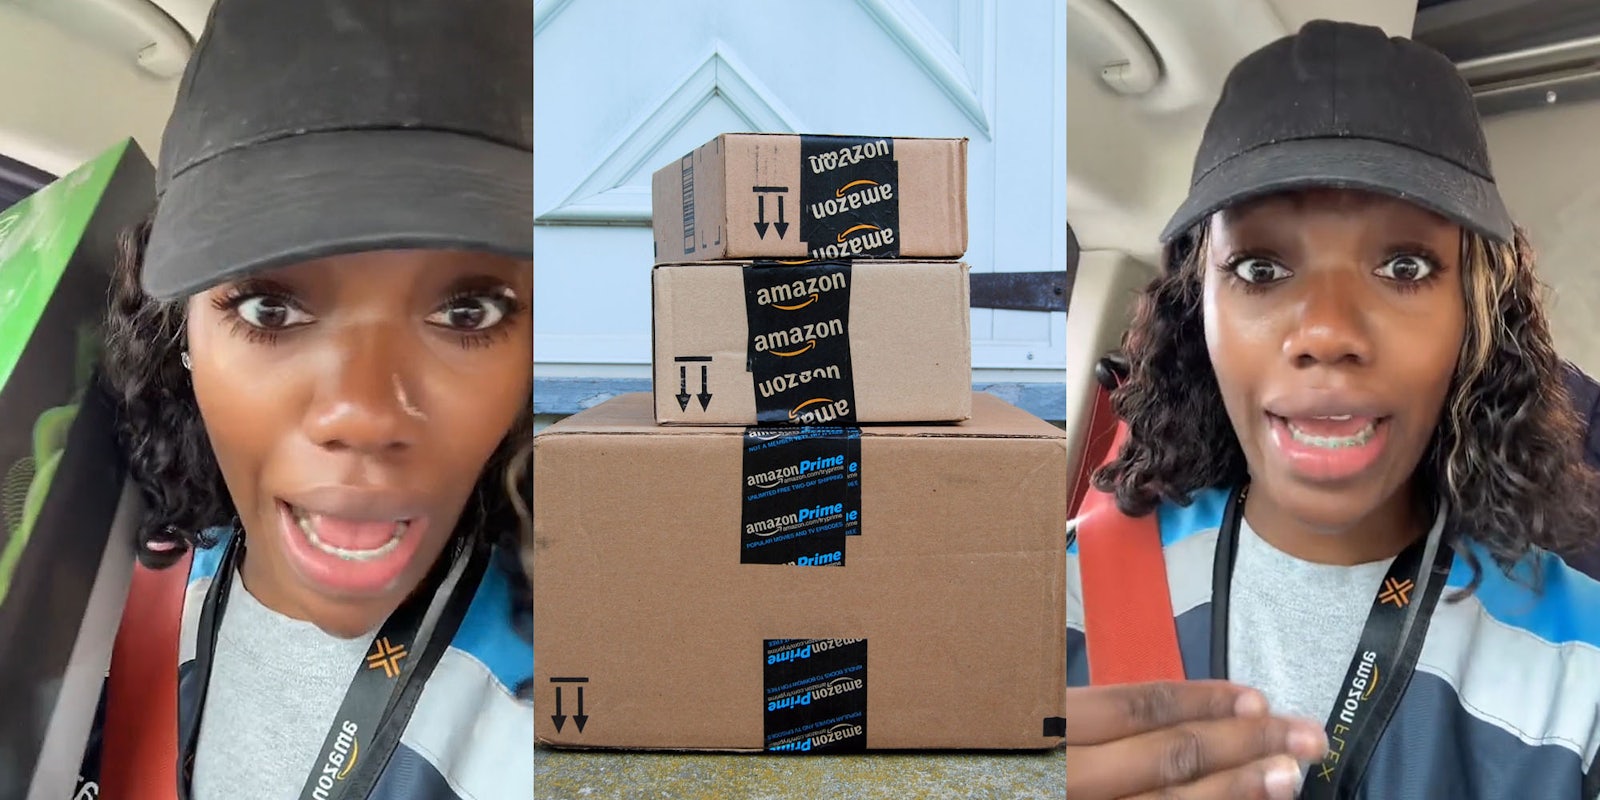 Amazon delivery driver speaking in truck holding item not inside box (l) Amazon packages delivered at doorstep (c) Amazon delivery driver speaking in truck (r)